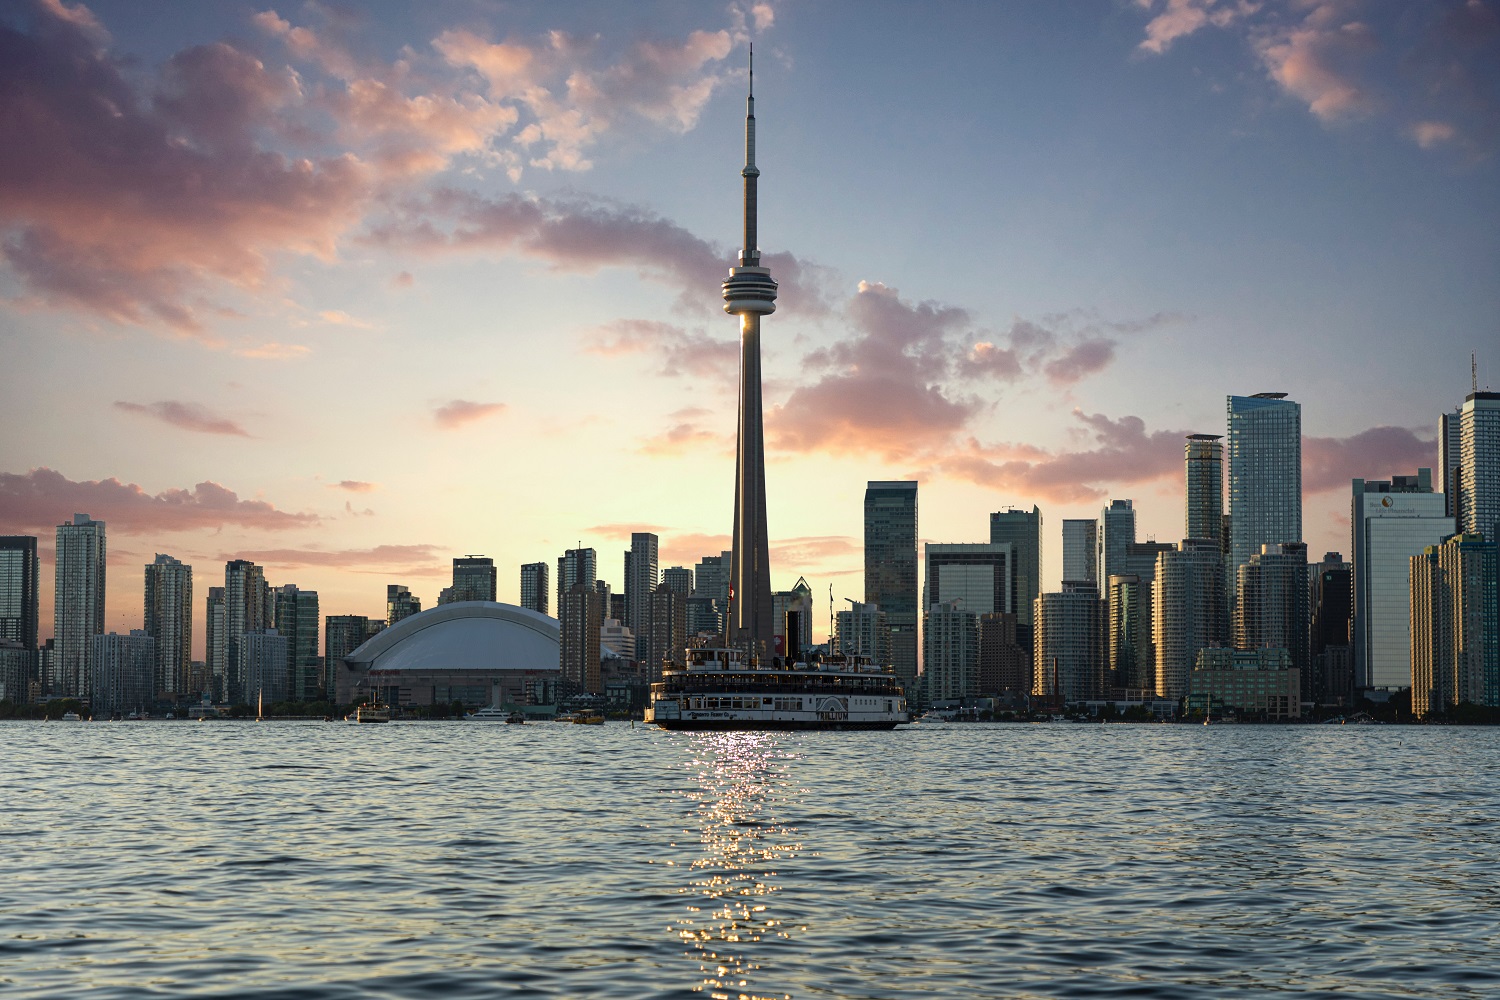 New Listings Down While the Average Selling Price in the GTA Levels Off in October